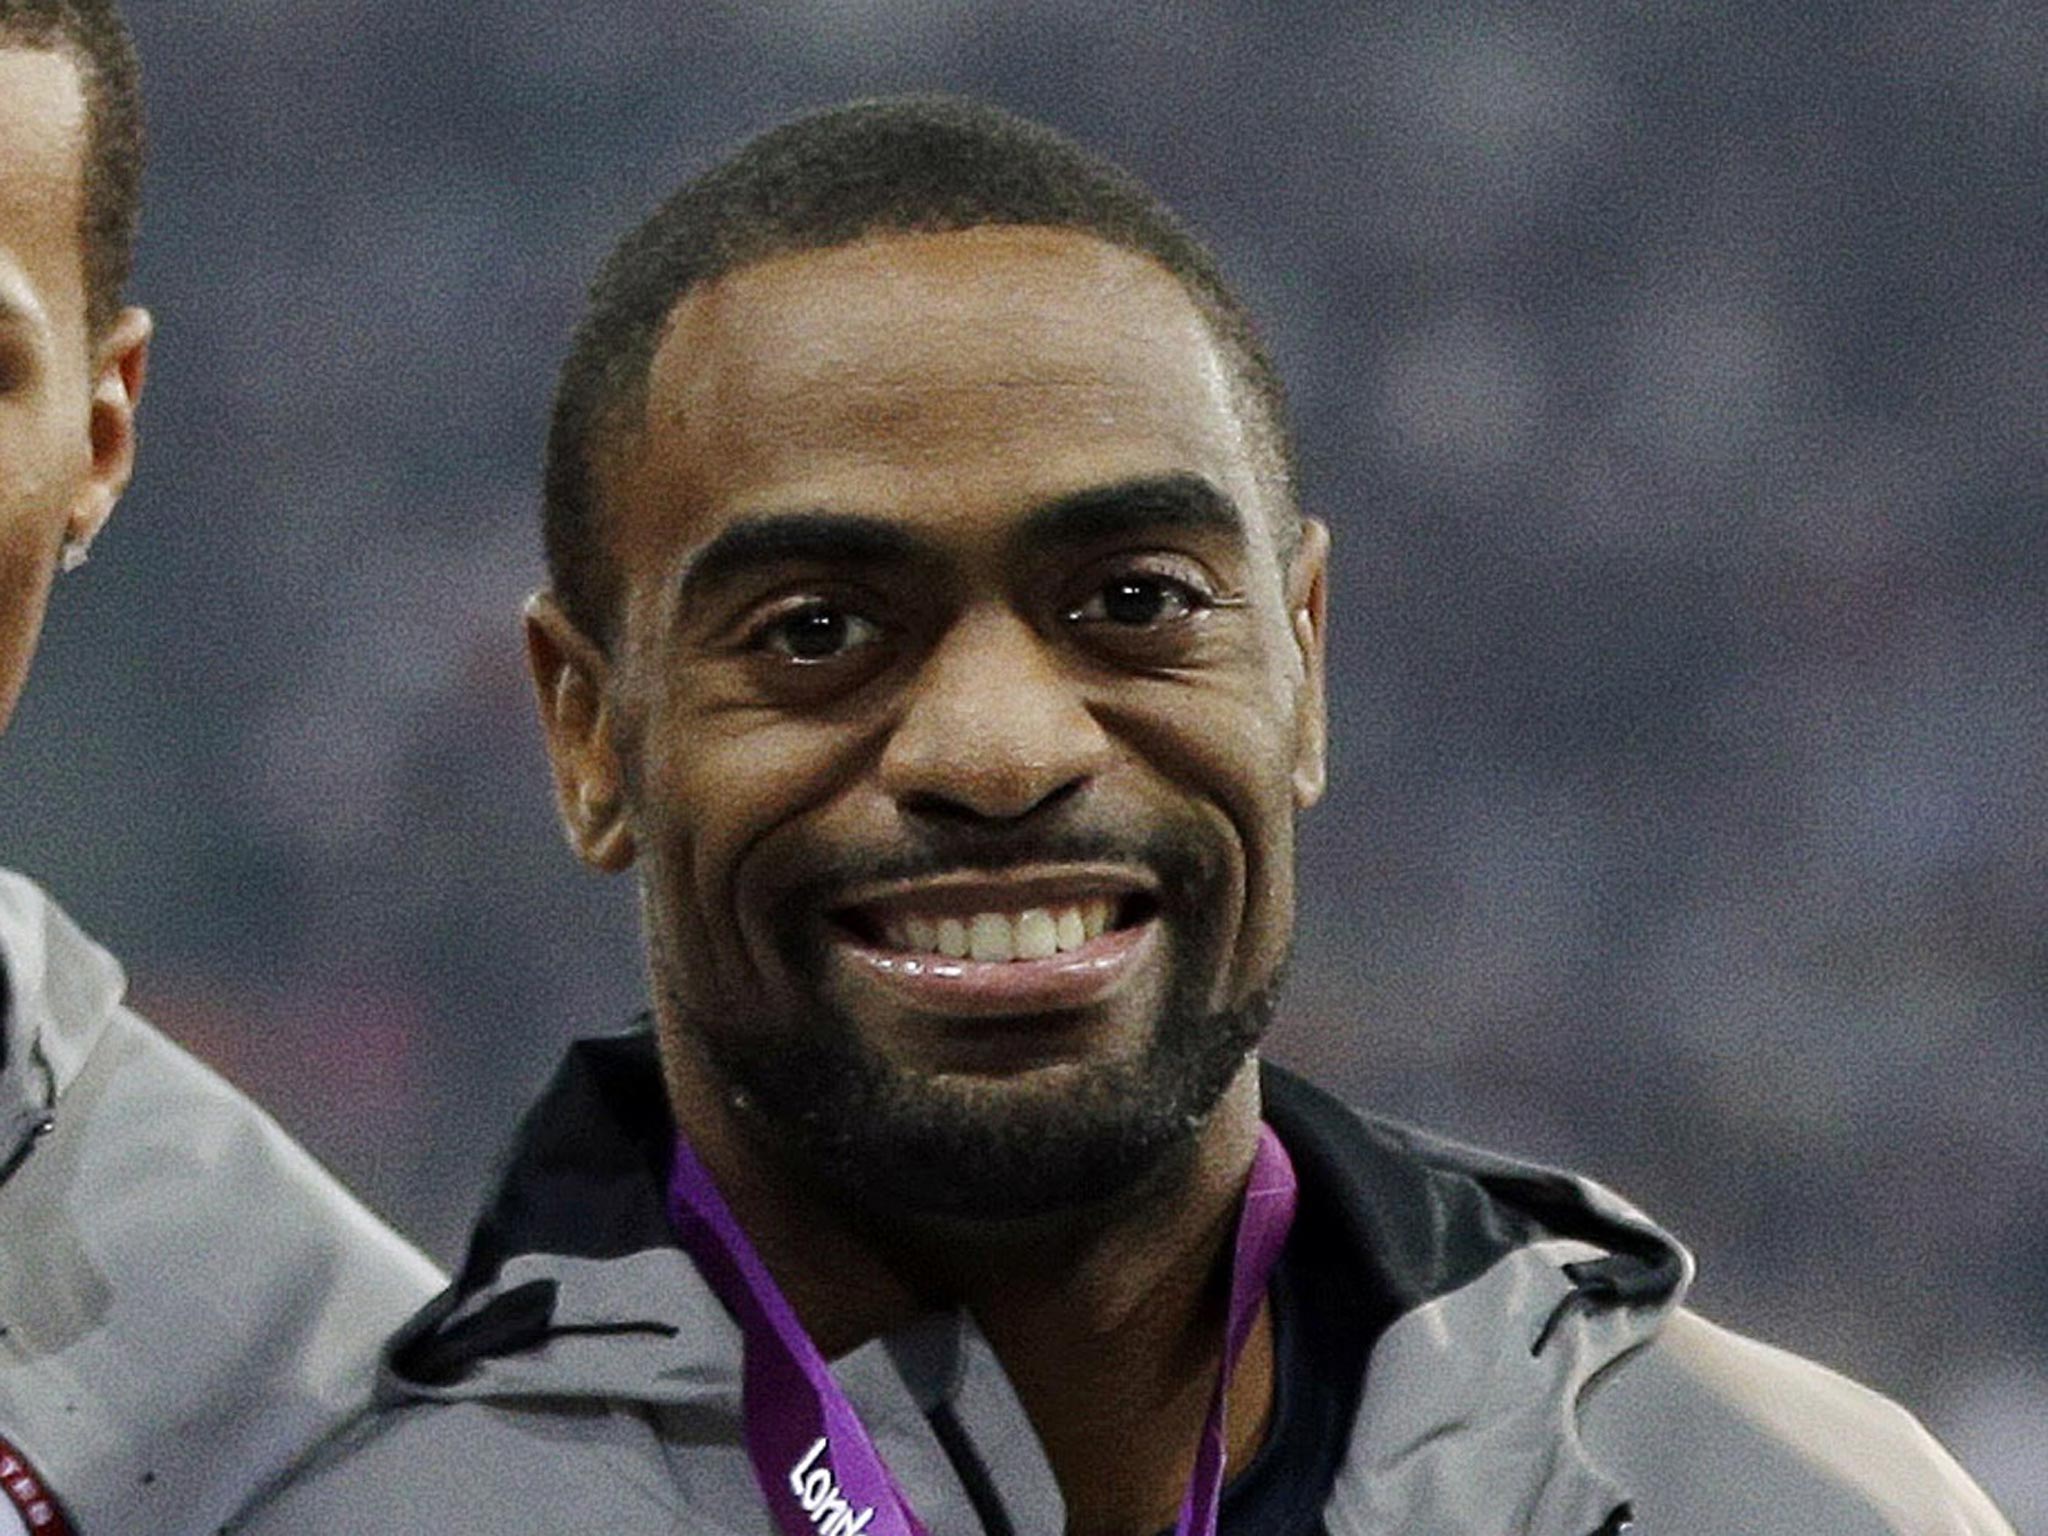 Tyson Gay accepted a one-year period of ineligibility which began on 23 June 2013